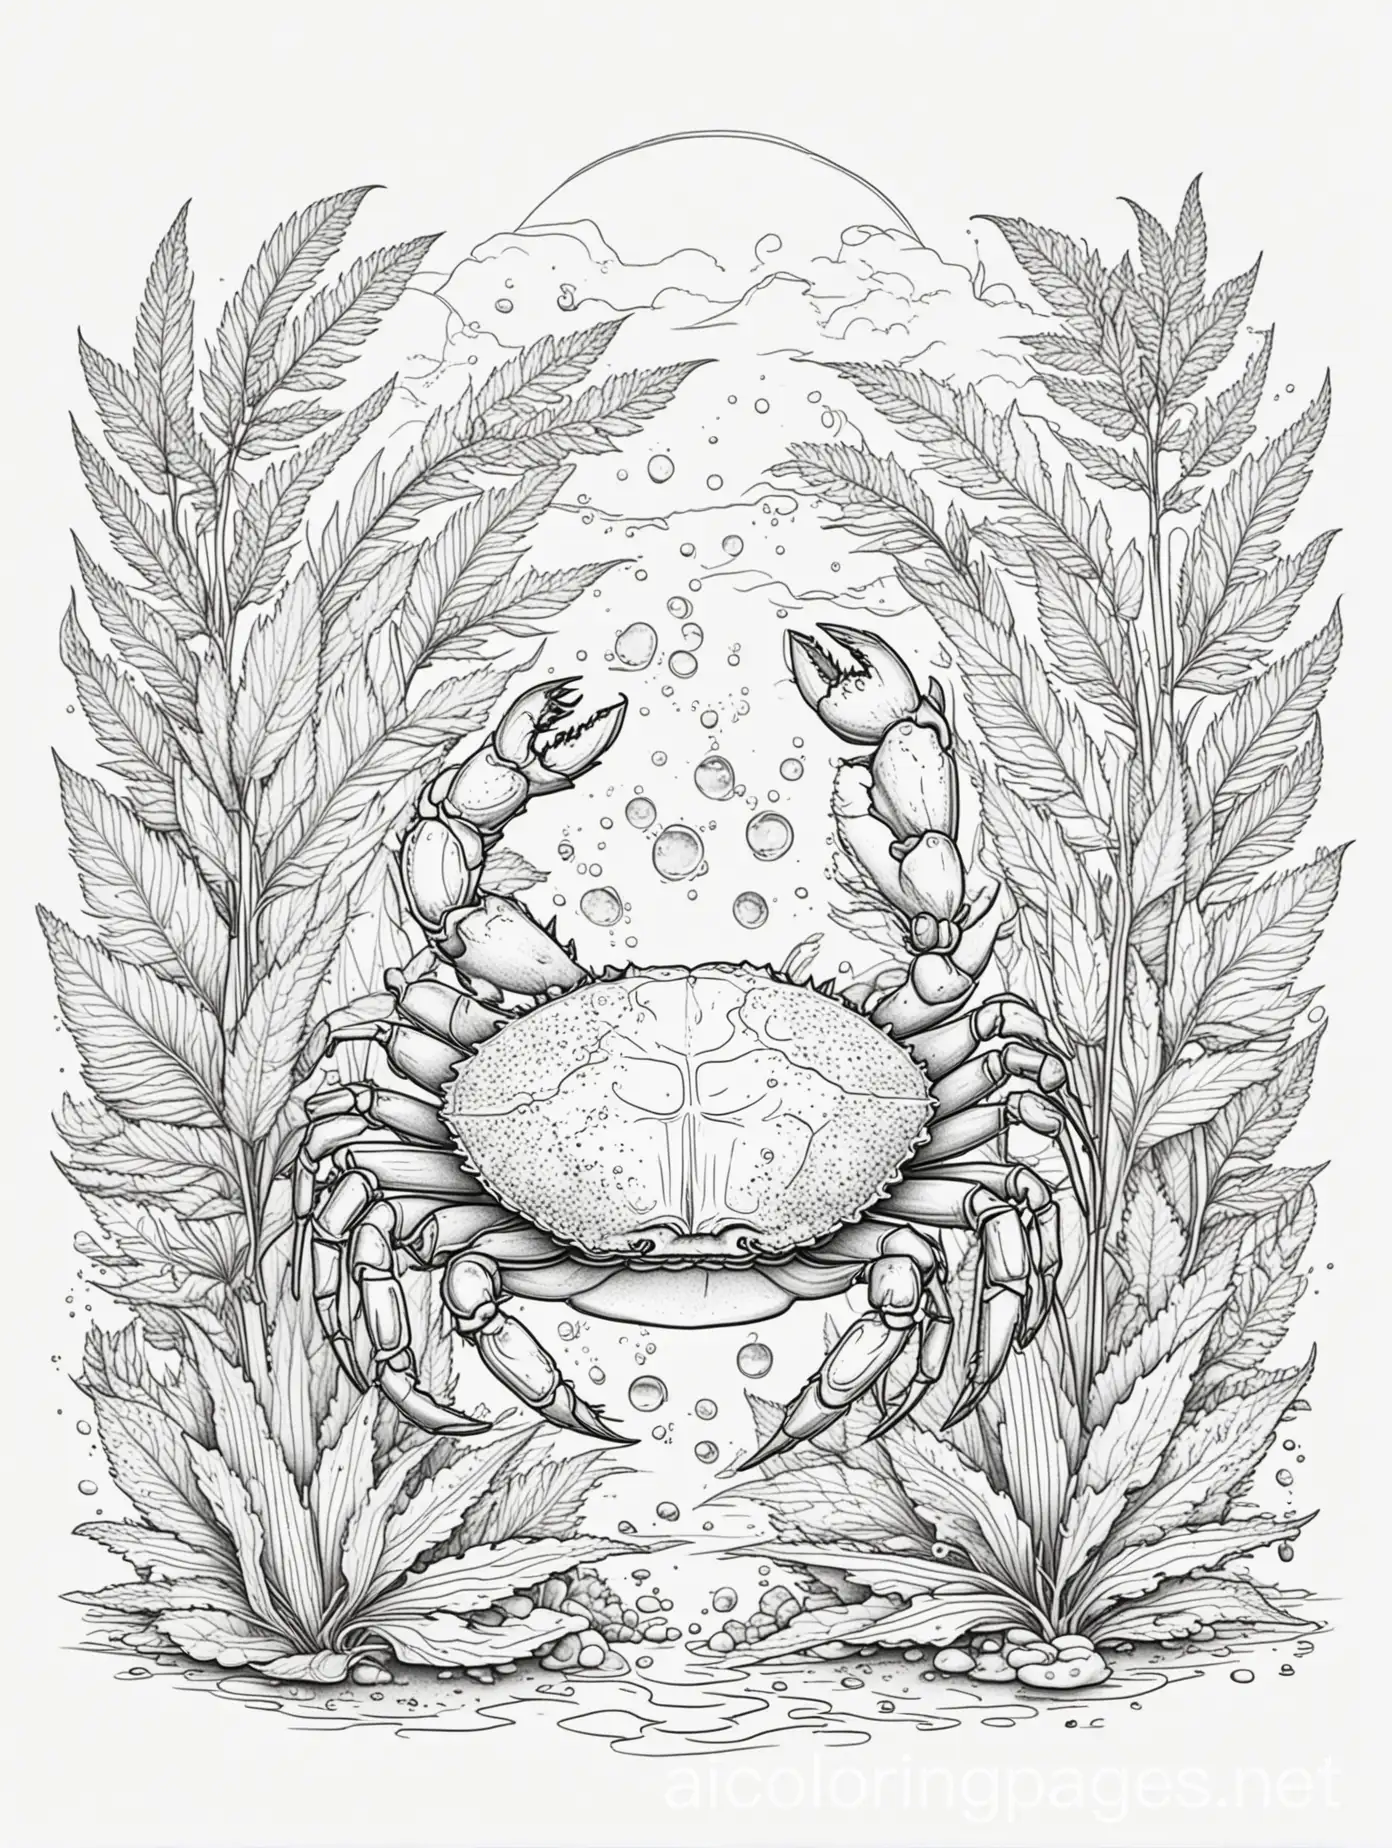 Fantasy-Crab-Coloring-Page-for-Kids-Simplified-Line-Art-on-White-Background